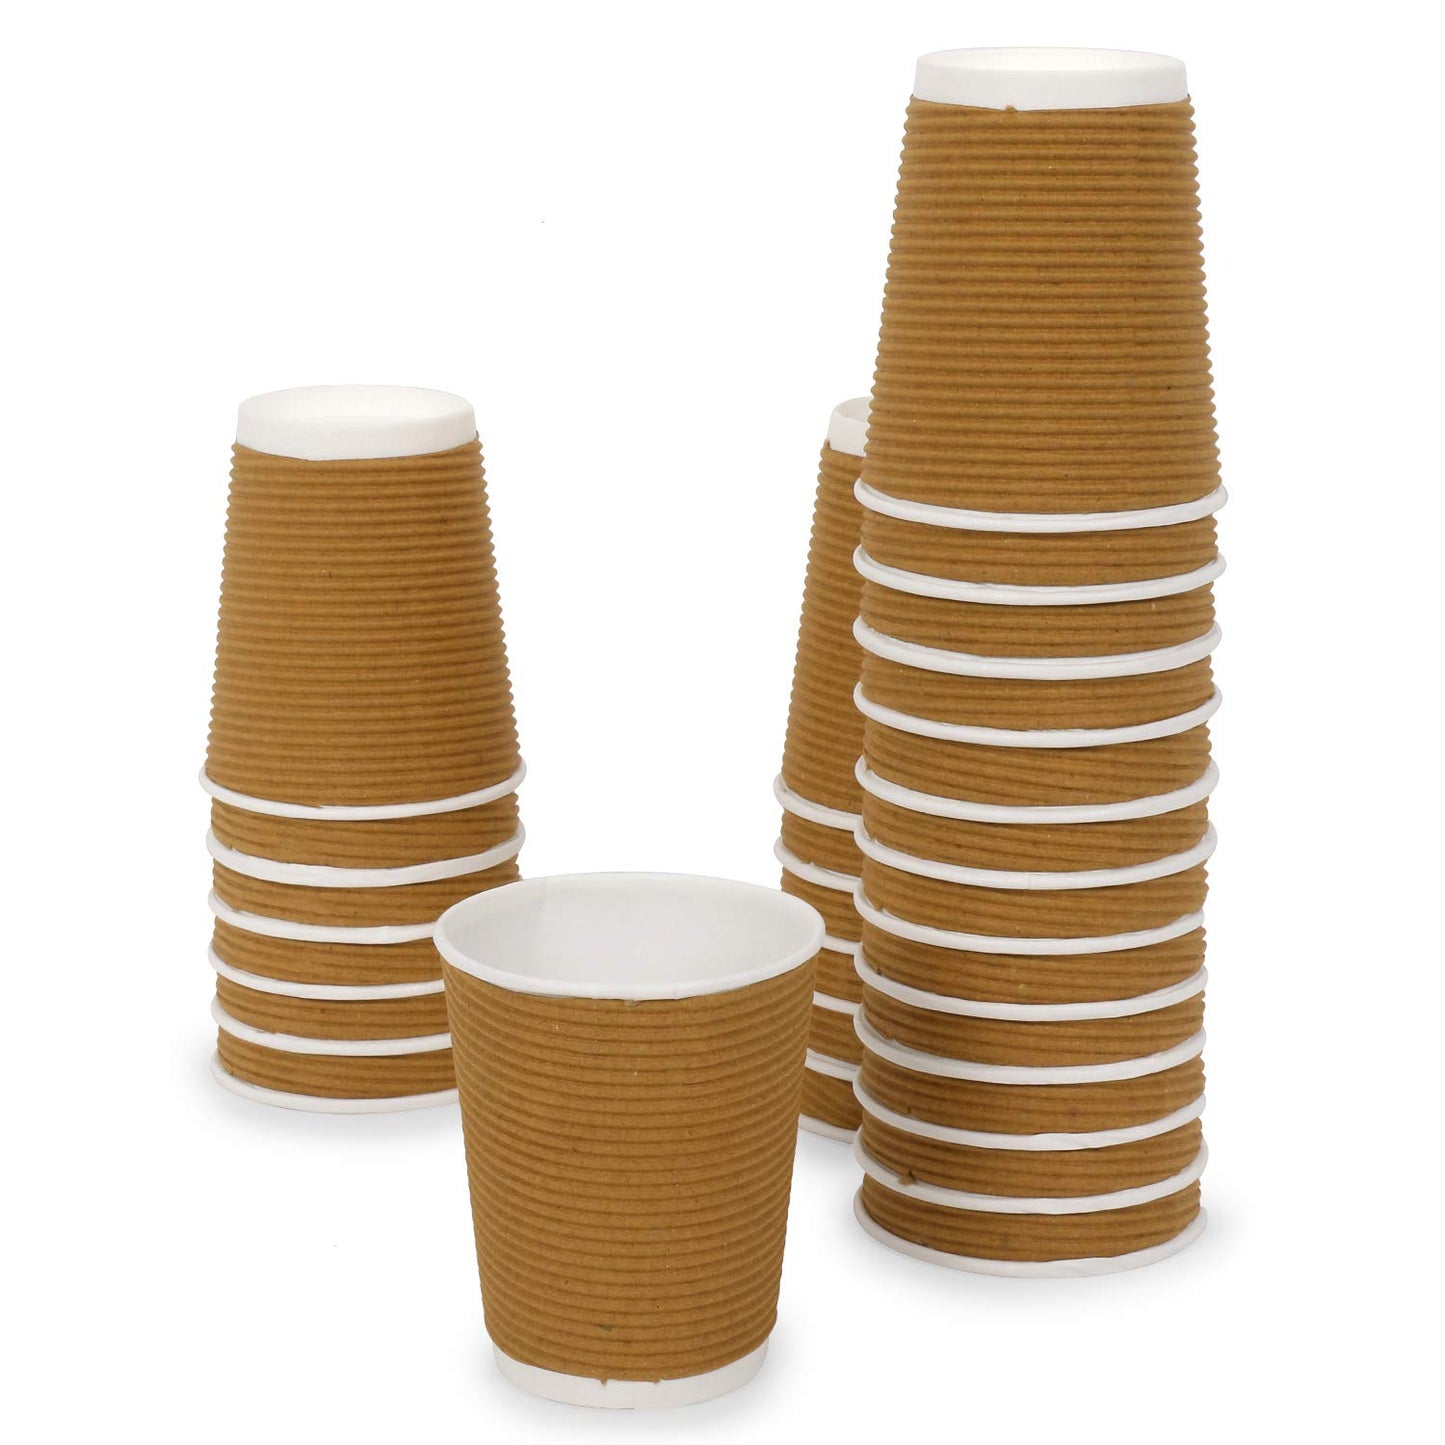 Ripple Paper Disposable Tea / Coffee Cups, 150 ml - Brown (Pack of 50)